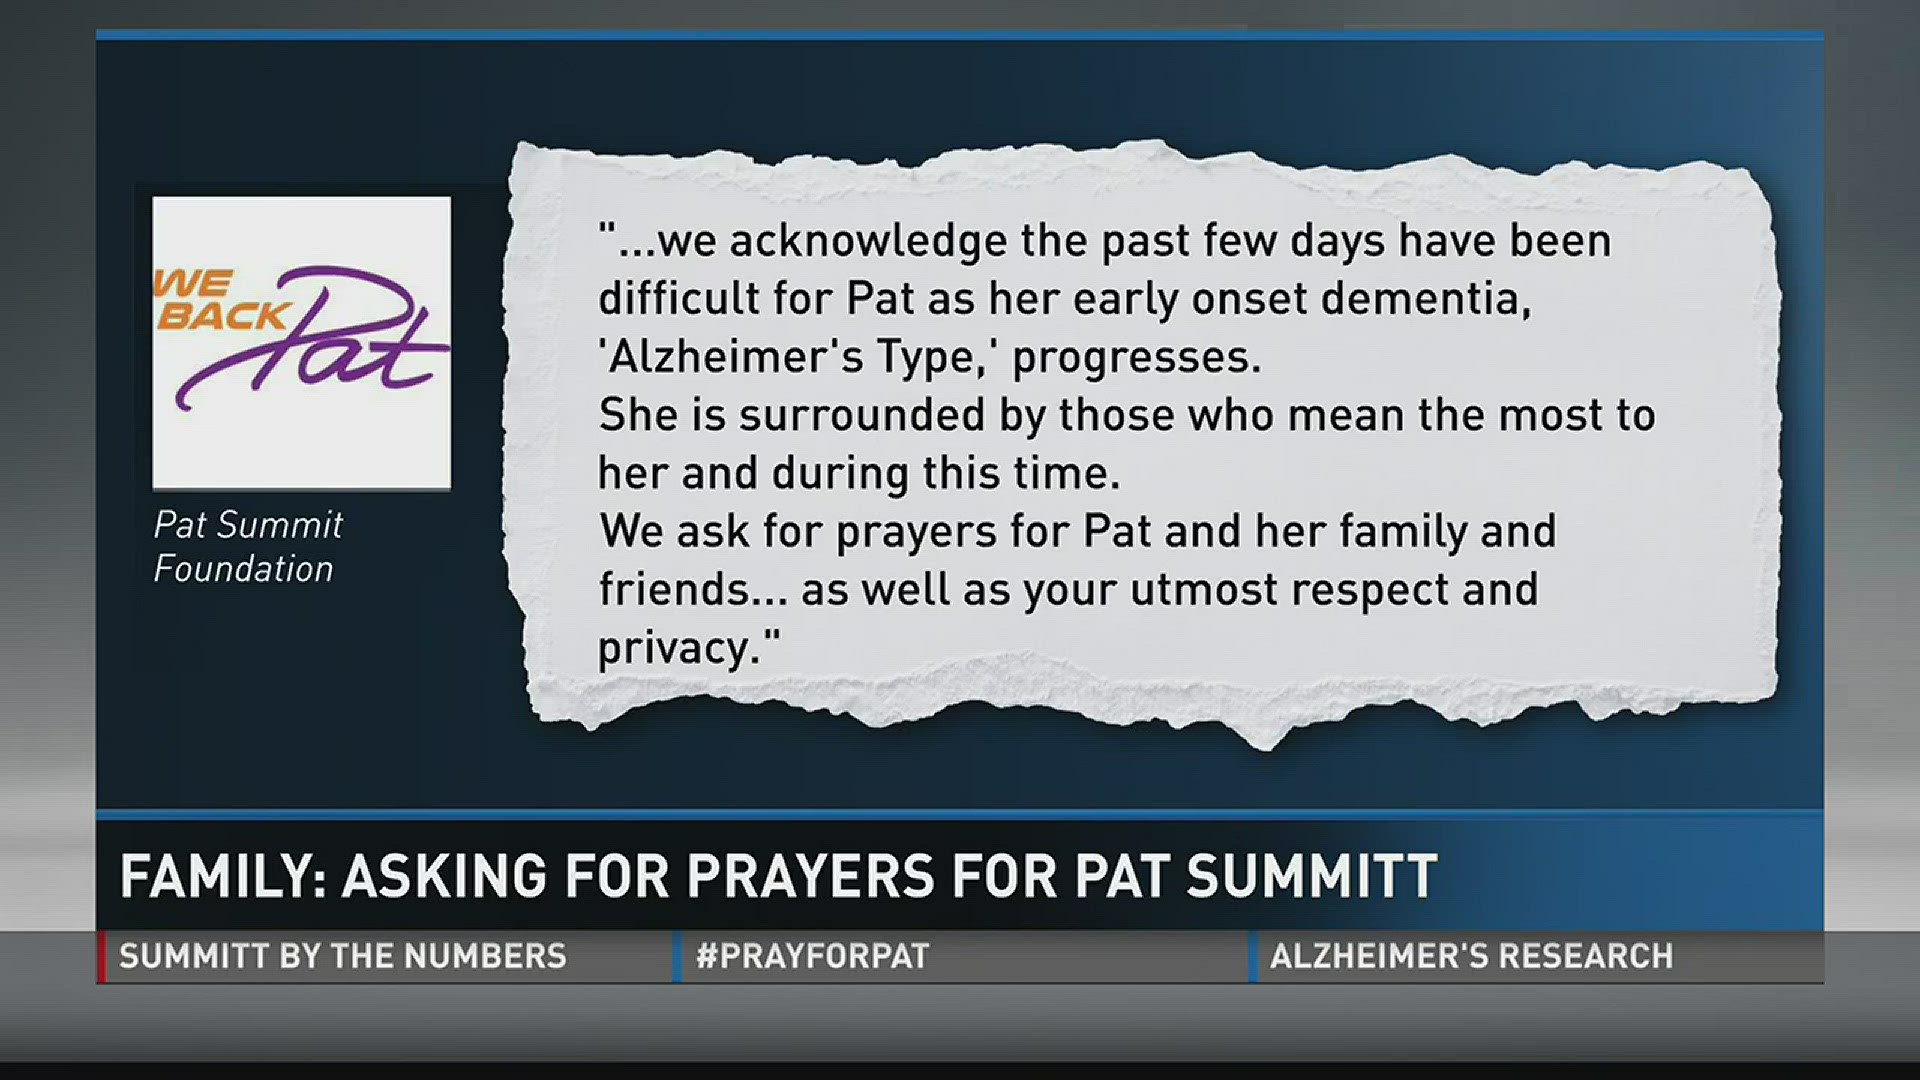 Former UT Lady Vols coach Pat Summitt's condition worsened over the past few days and her family is asking for prayers.